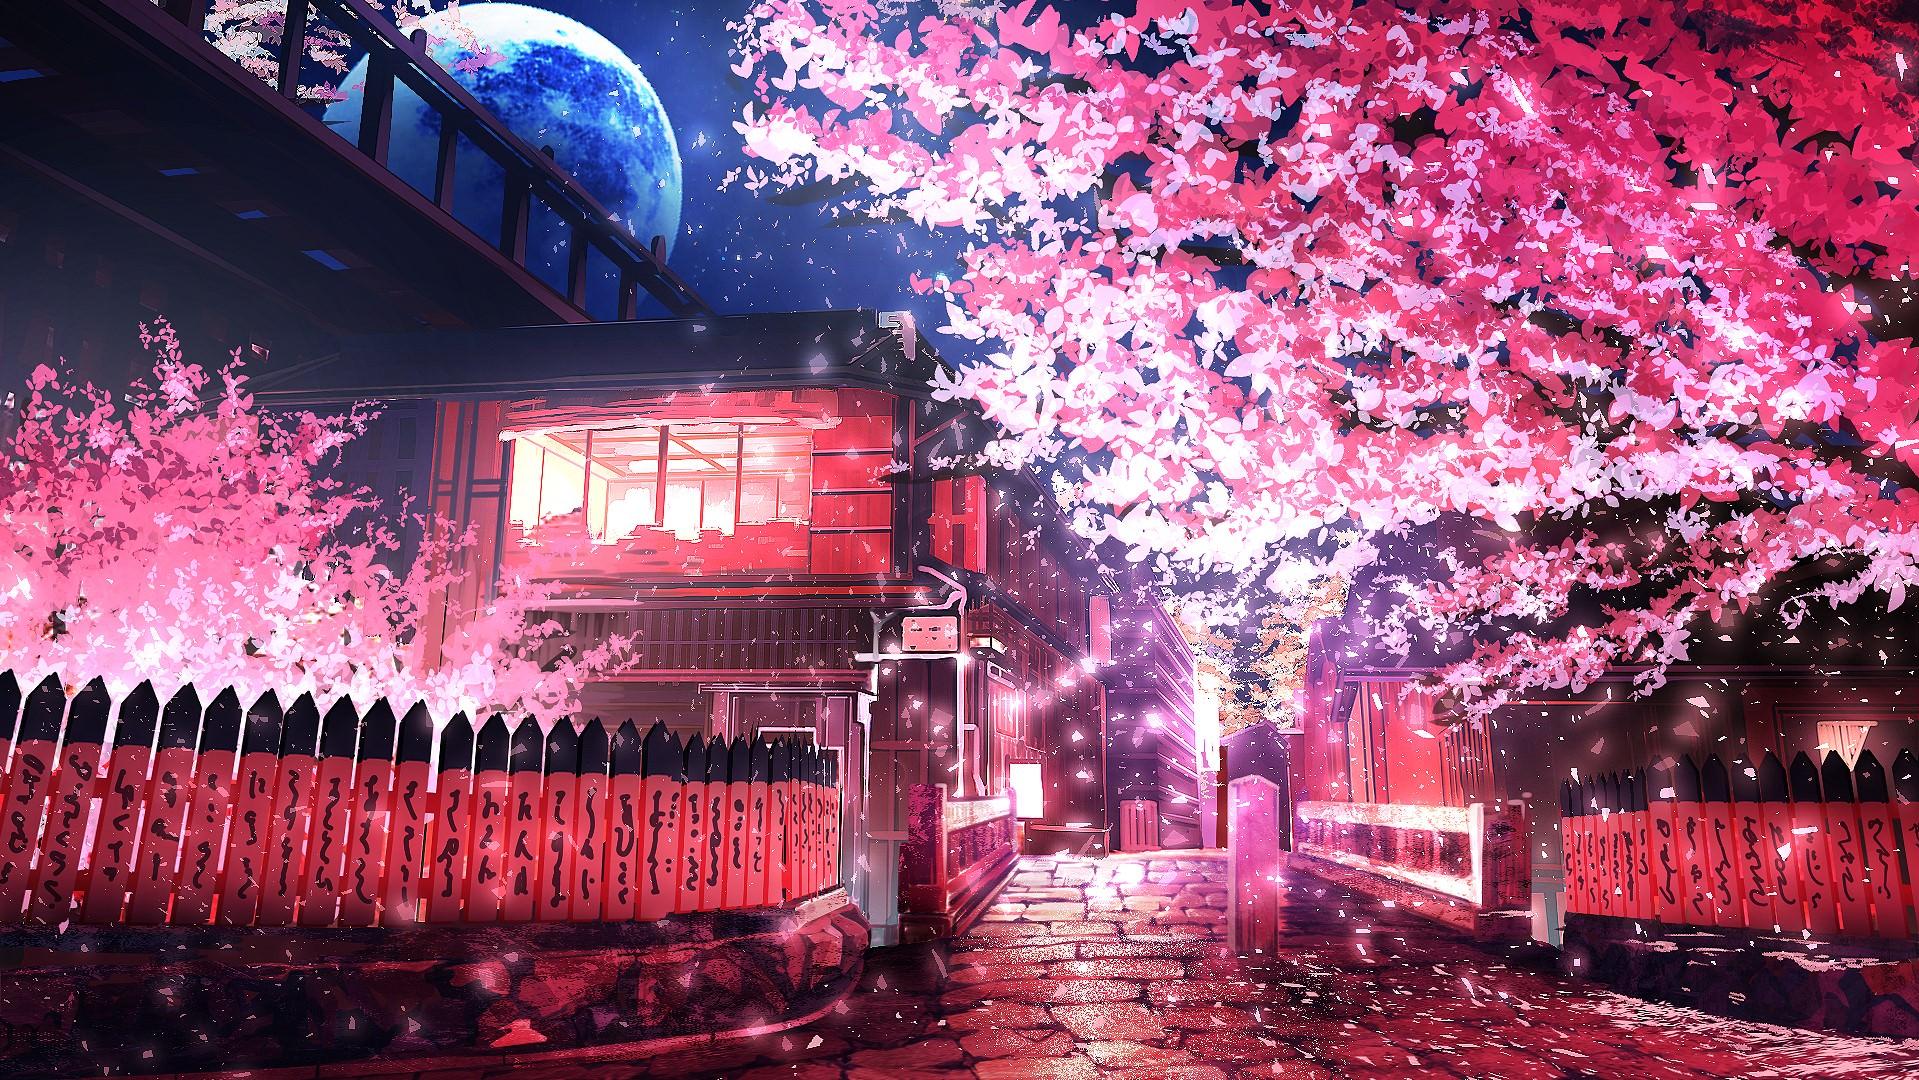 Aesthetic Anime Cherry Blossom - Loading Screen - The Sims 4 Mods -  CurseForge